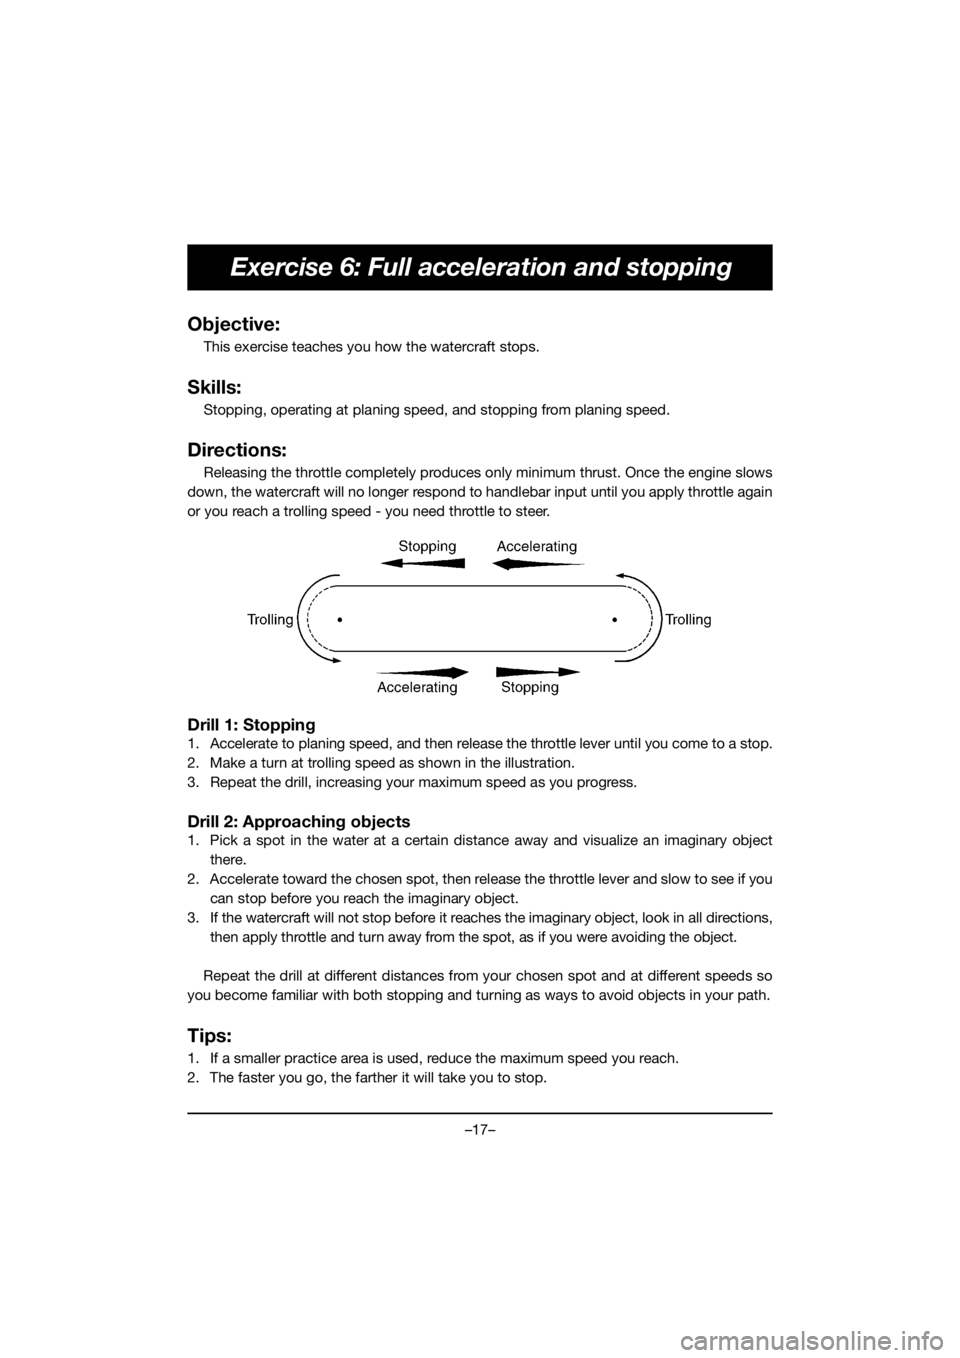 YAMAHA EX SPORT 2020 User Guide –17–
Exercise 6: Full acceleration and stopping
Objective:
This exercise teaches you how the watercraft stops. 
Skills:
Stopping, operating at planing speed, and stopping from planing speed.
Direc